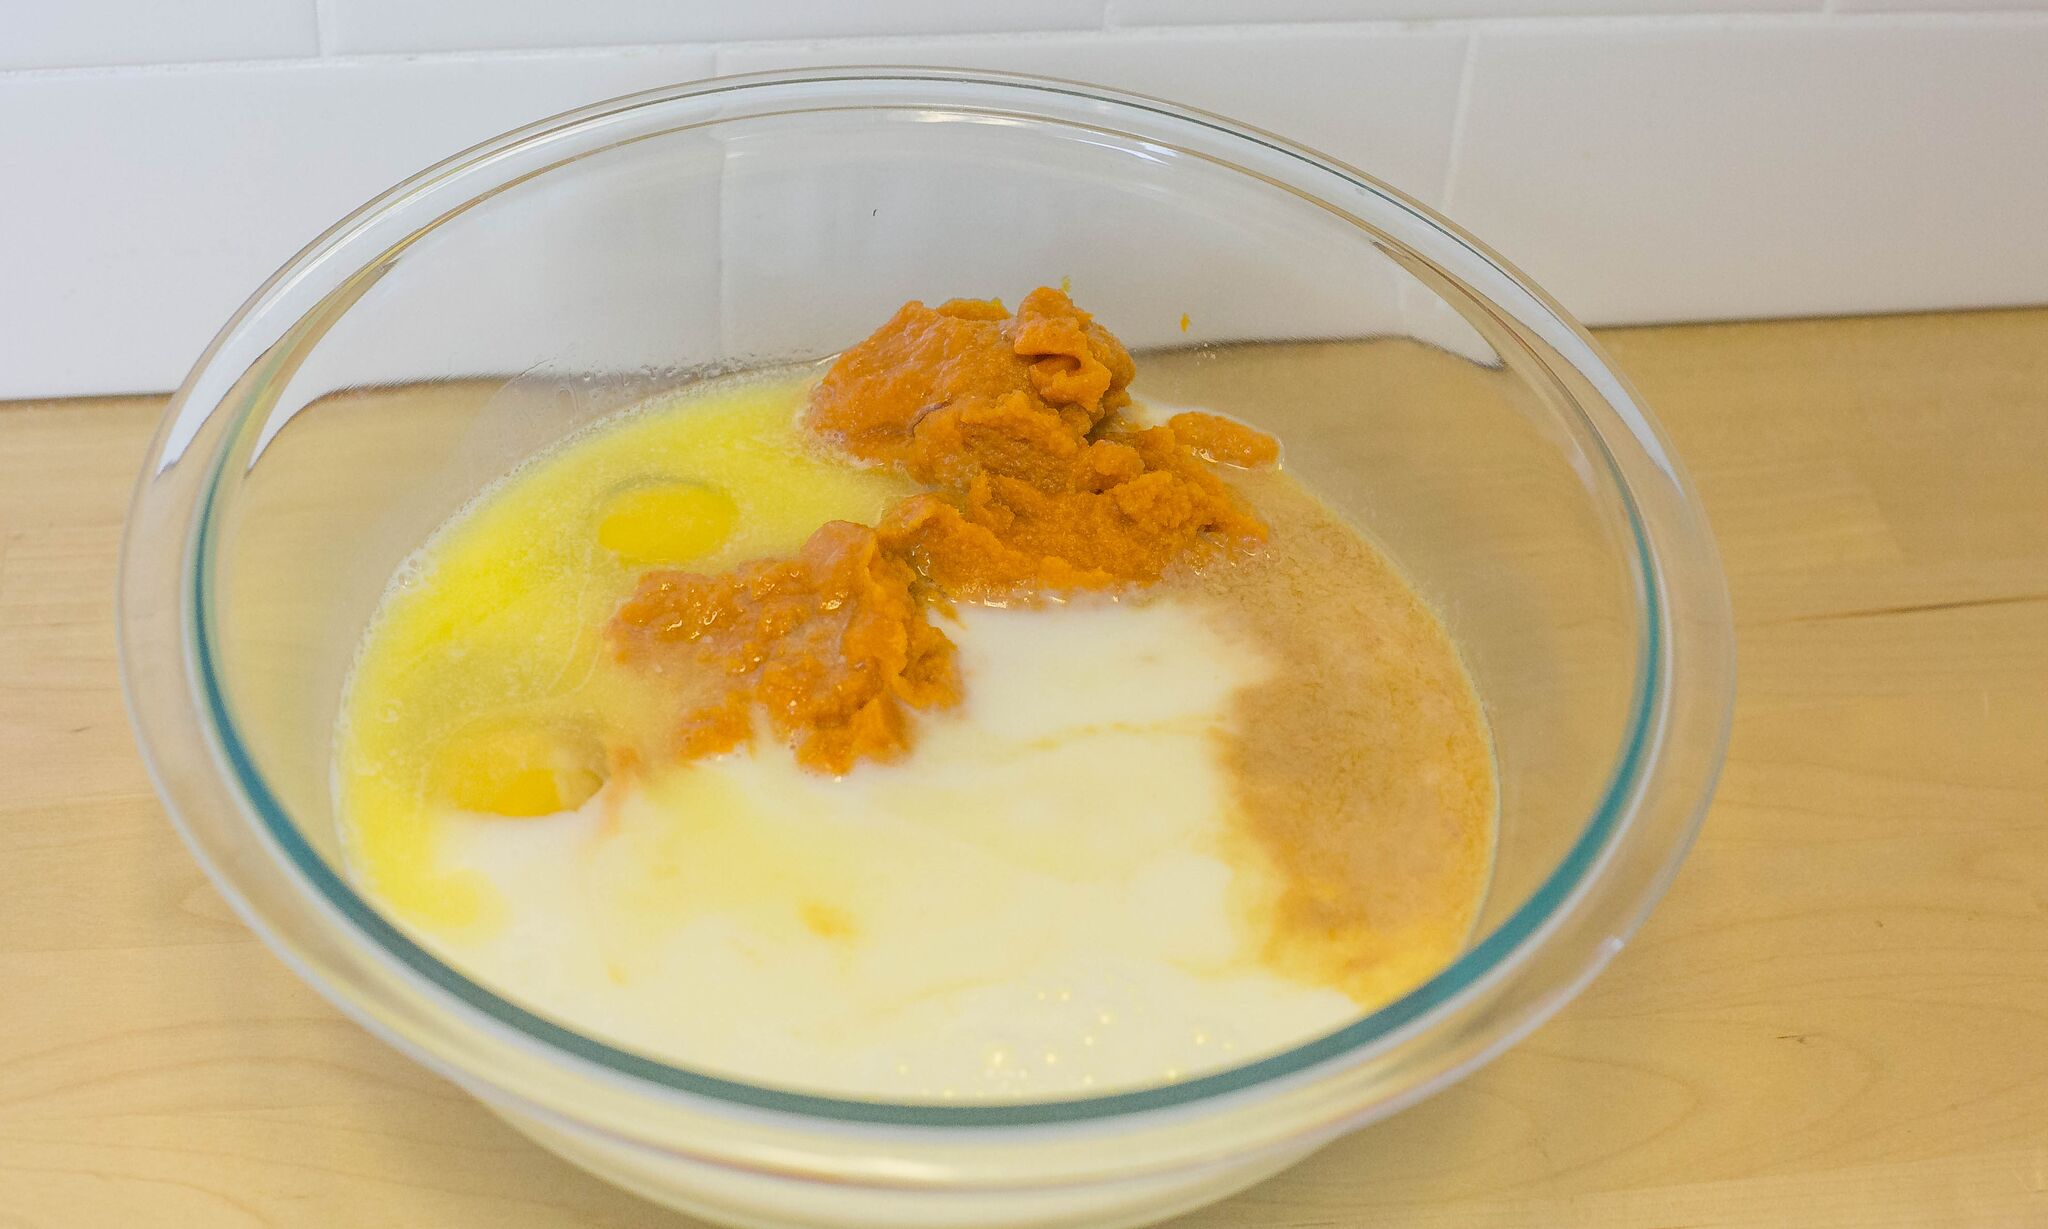 n a separate bowl, beat eggs, melted butter, milk, vanilla extract and pumpkin puree until well blended.